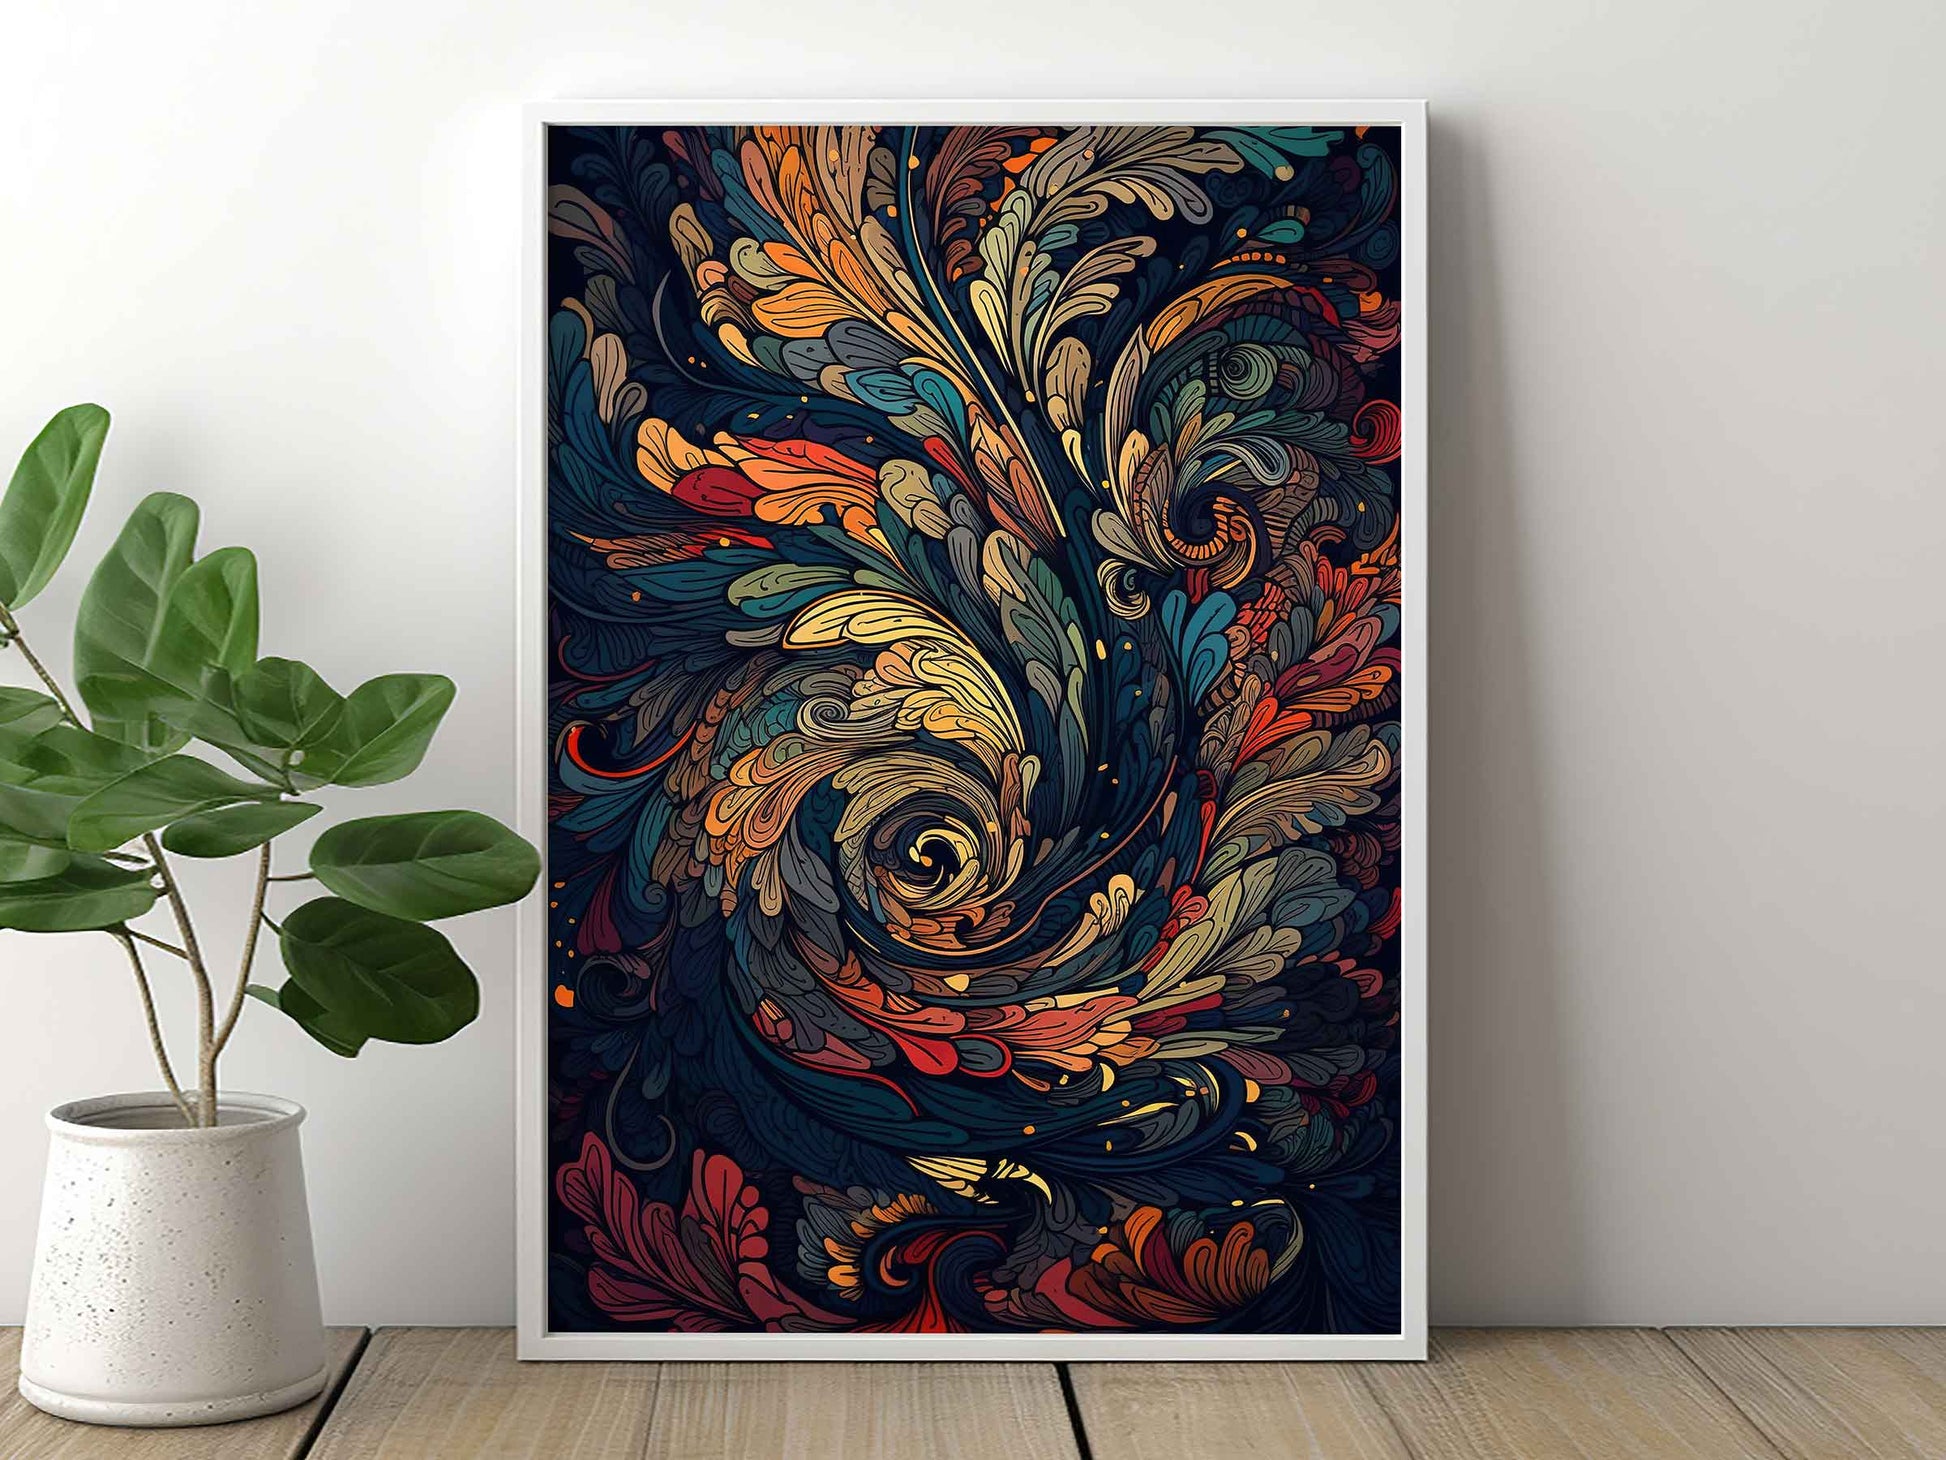 Framed Image of Vintage Psychedelic Art Nouveau Parisian 70s Wall Art Poster Print